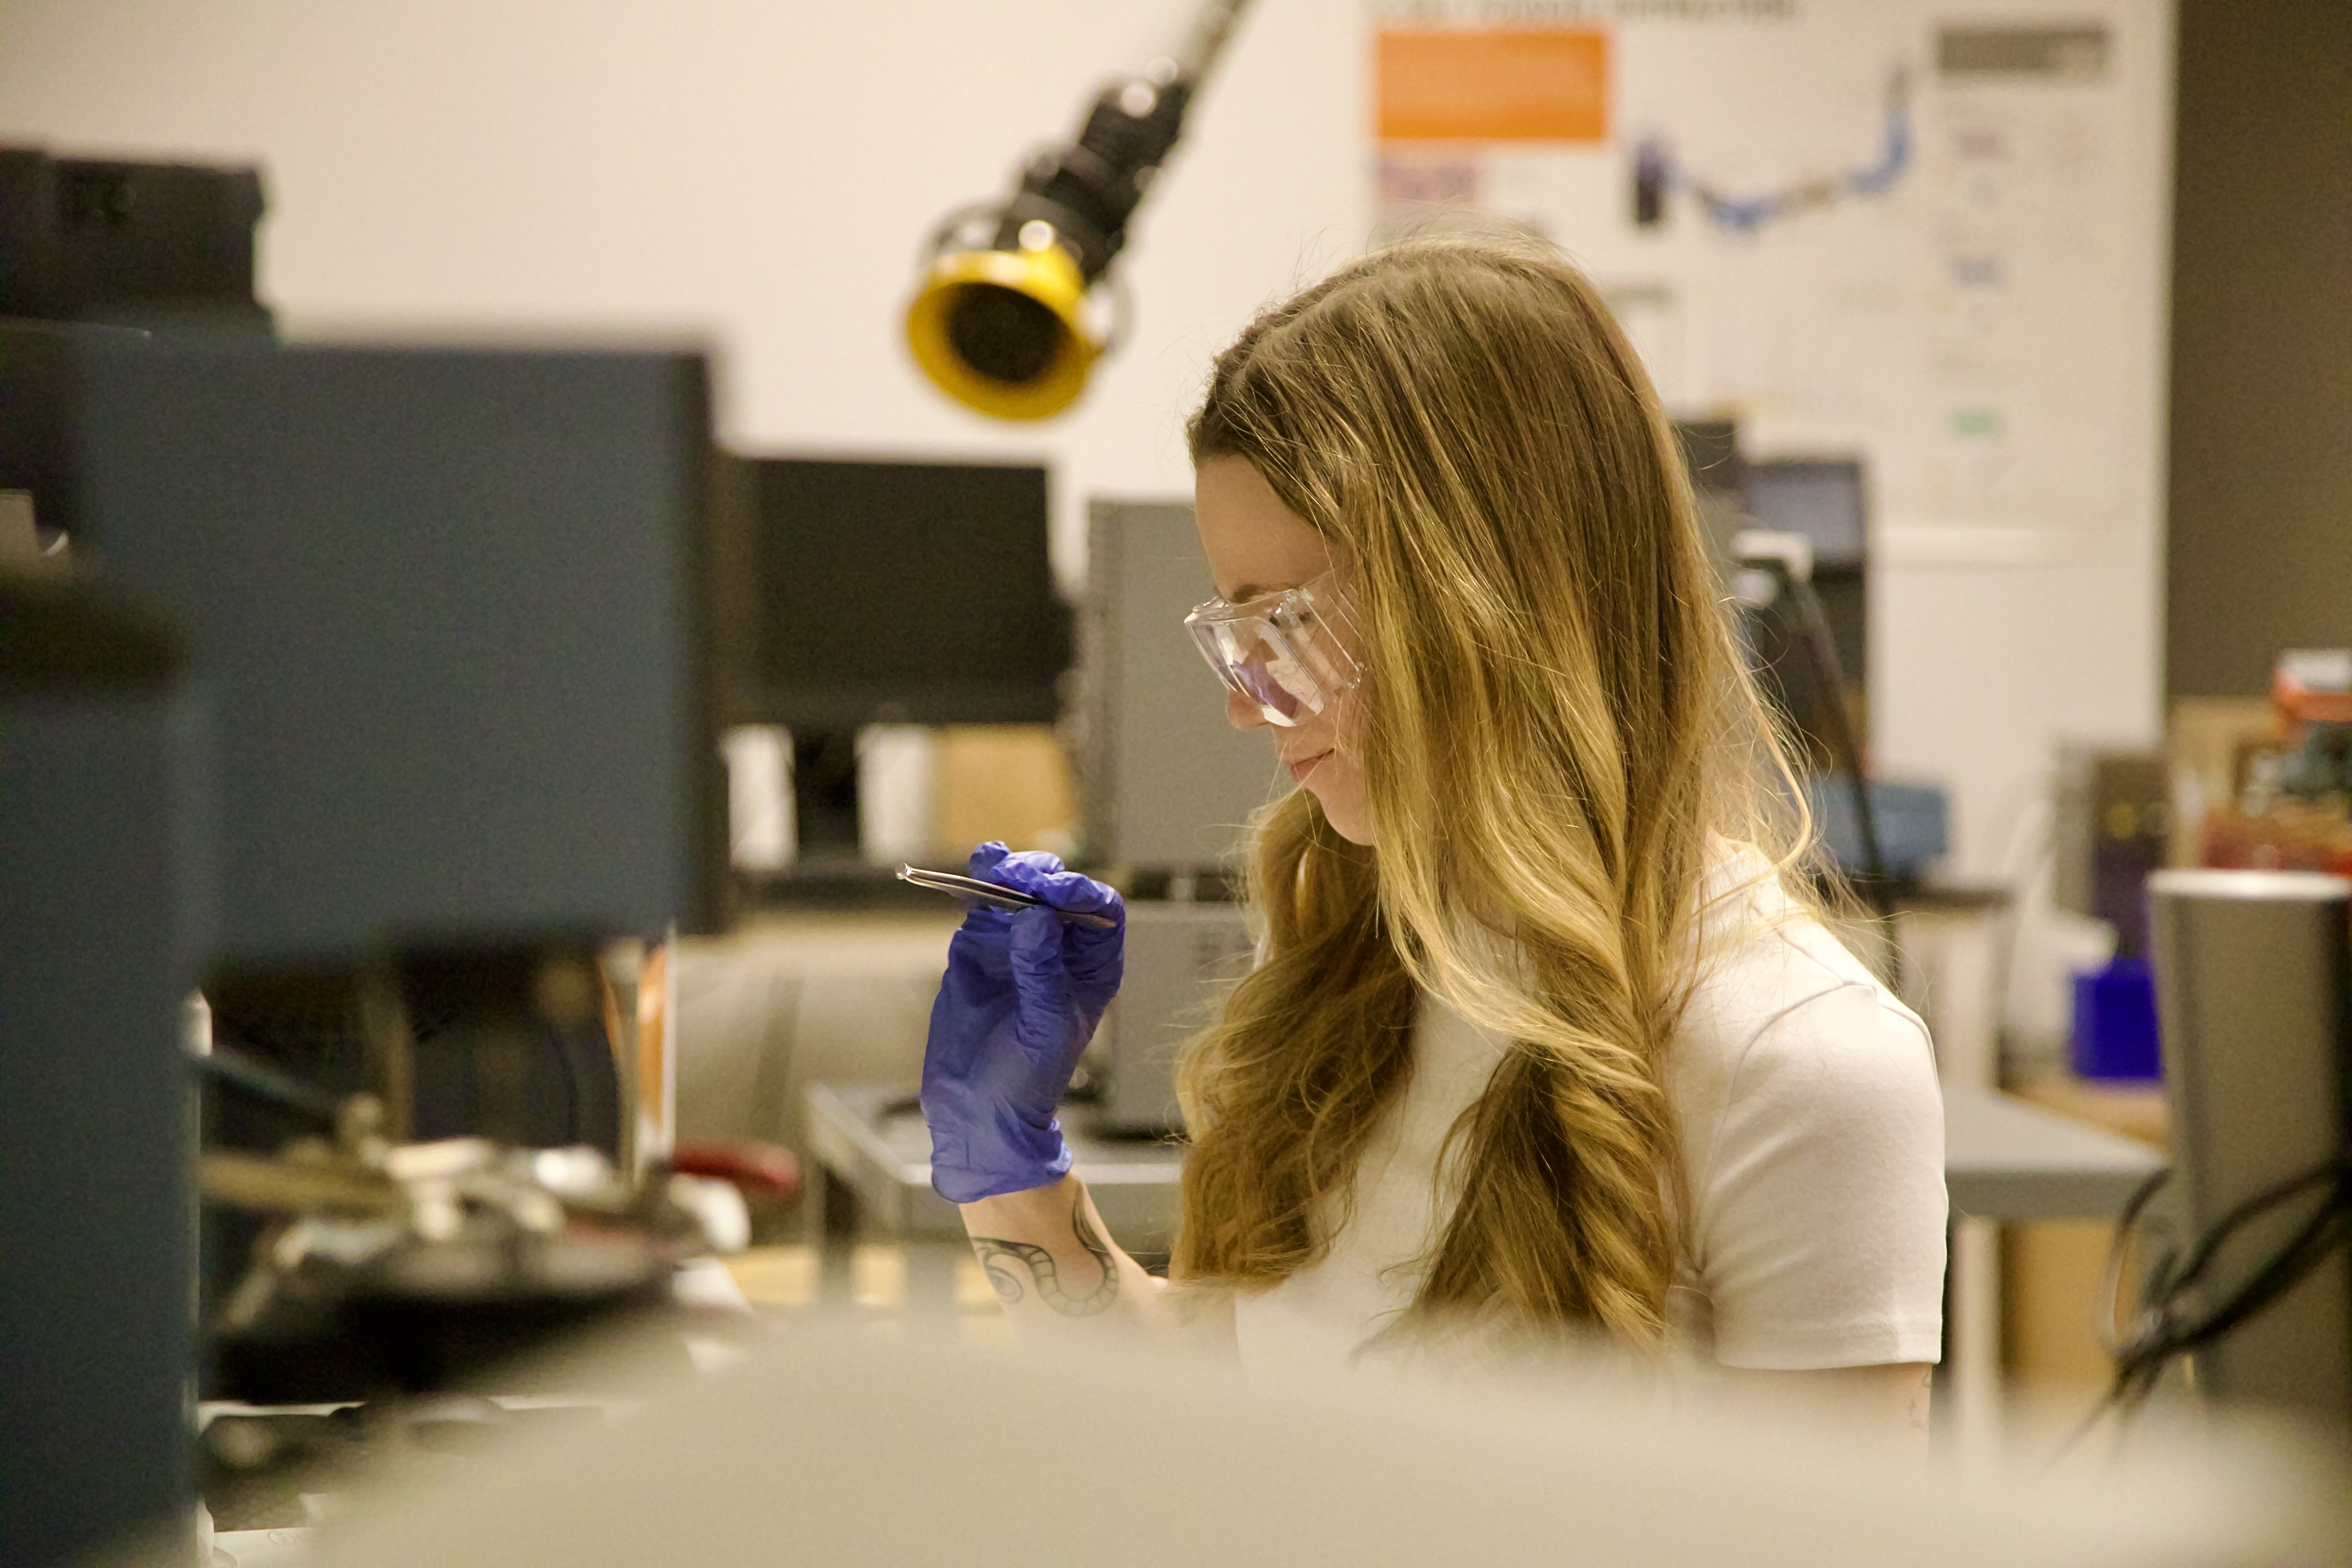 Megan Bellusci examines a sample in a lab as part of her coal fly ash research.